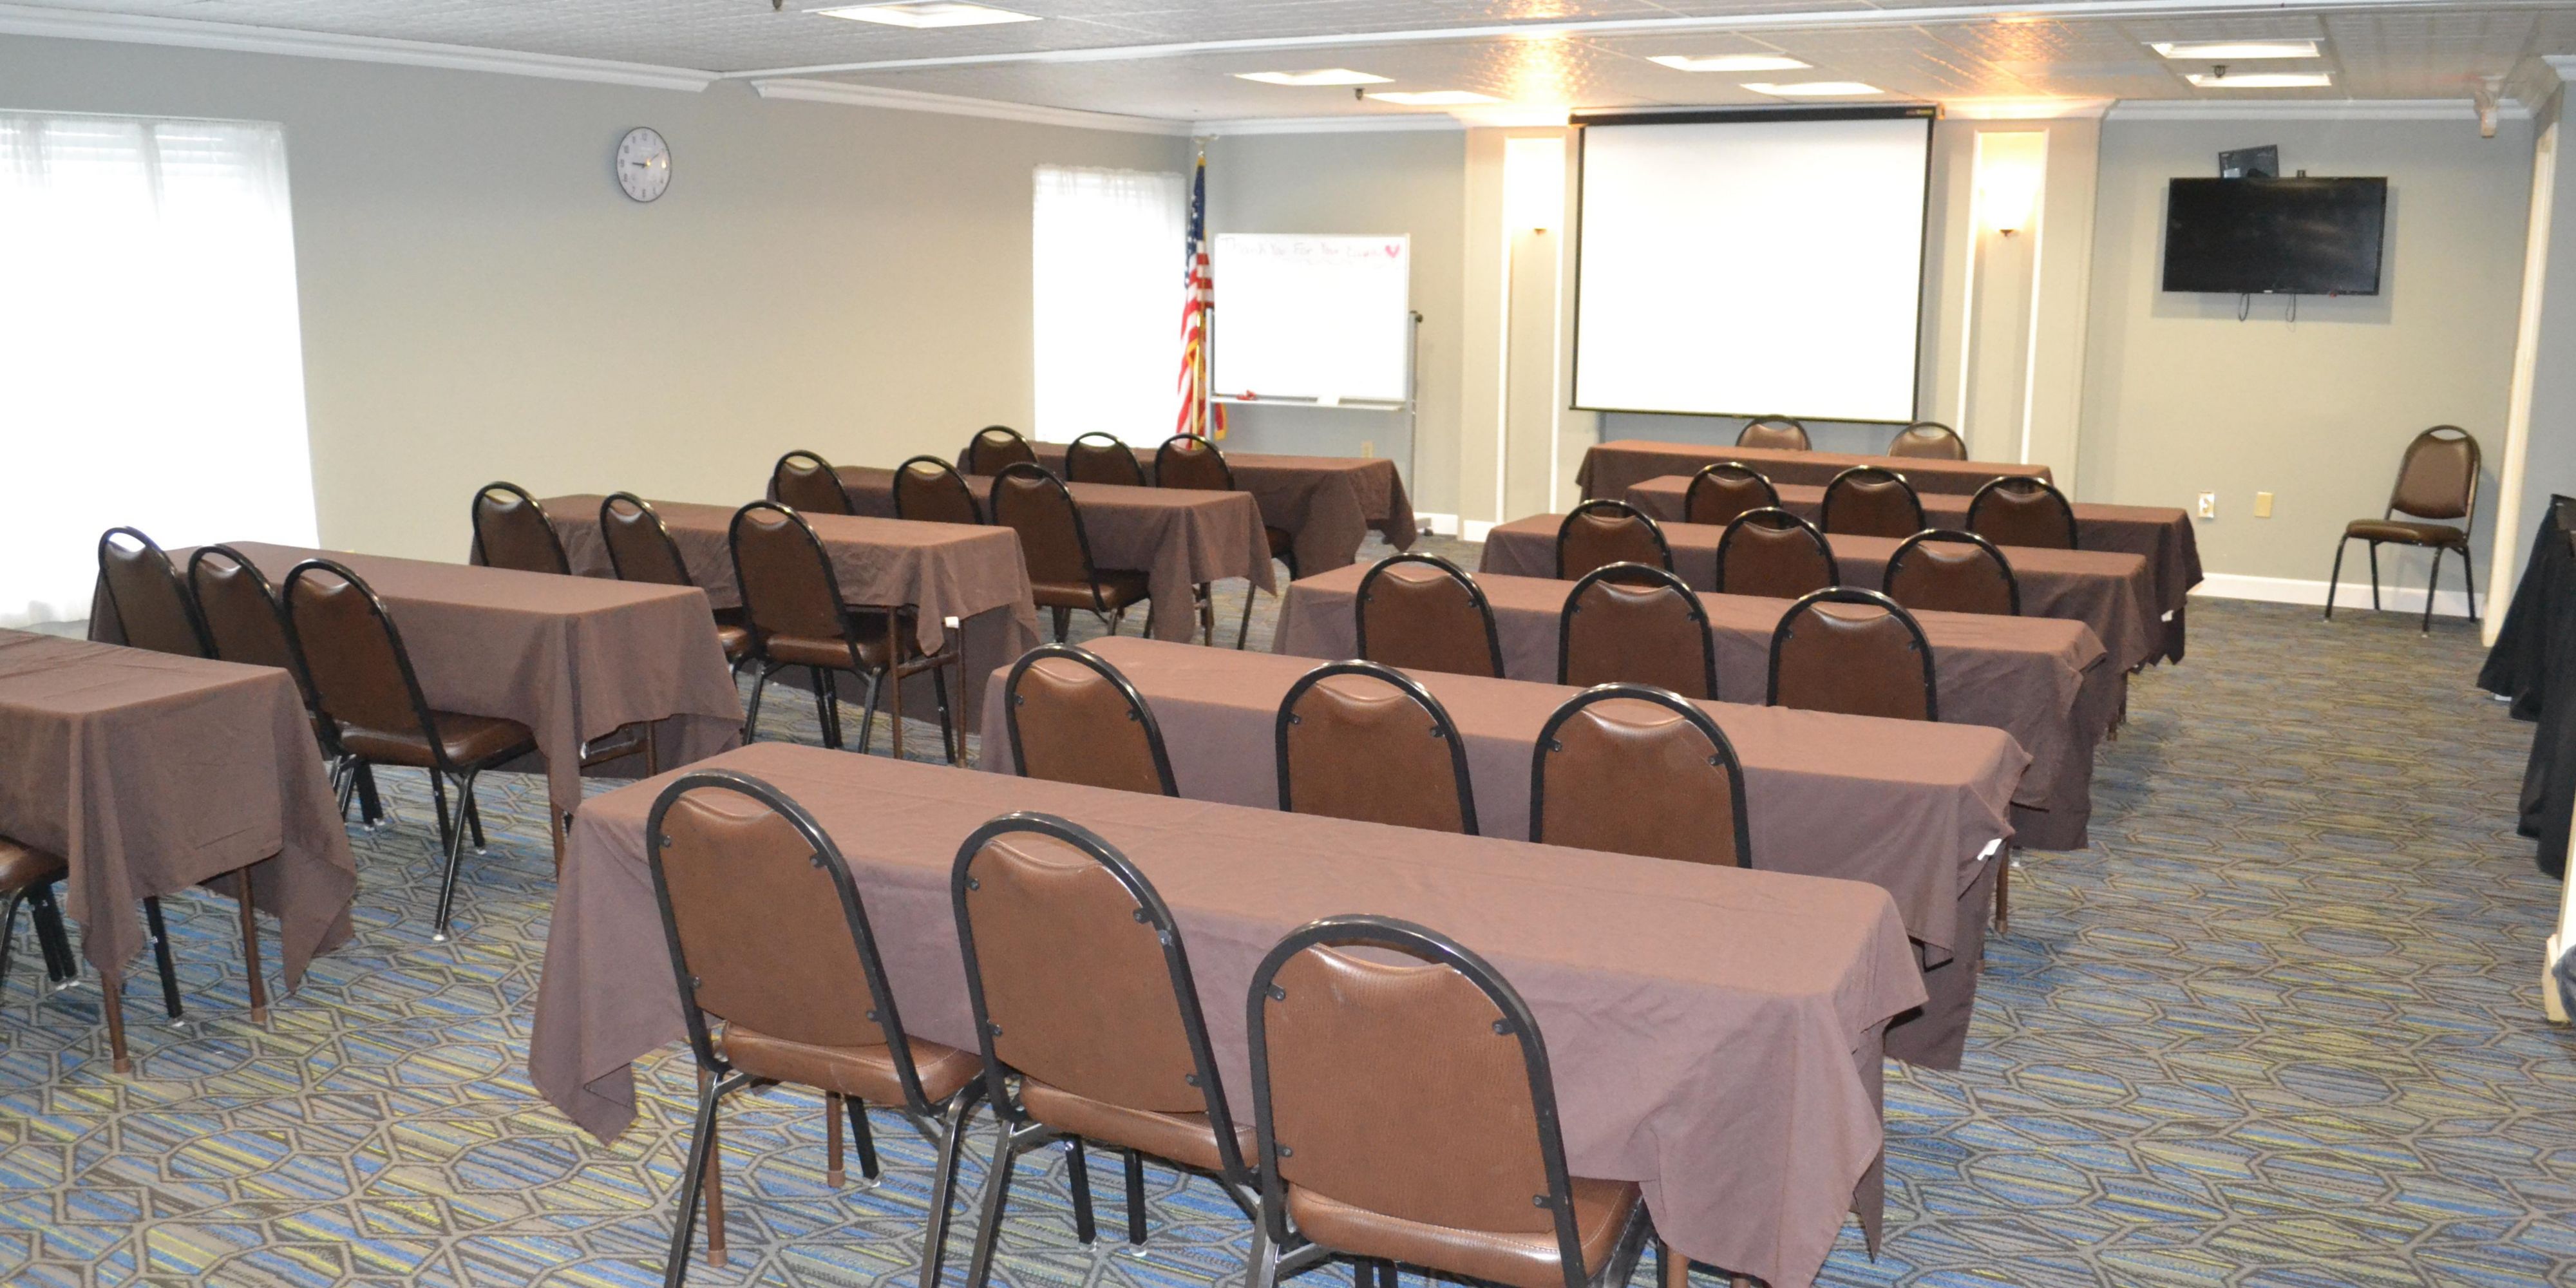 Are you in need of meeting space? Our hotel is perfect for corporate meetings and gatherings for social events up to 50 people. Please contact Chrissy Hoover at 717.790.0924 for more details.